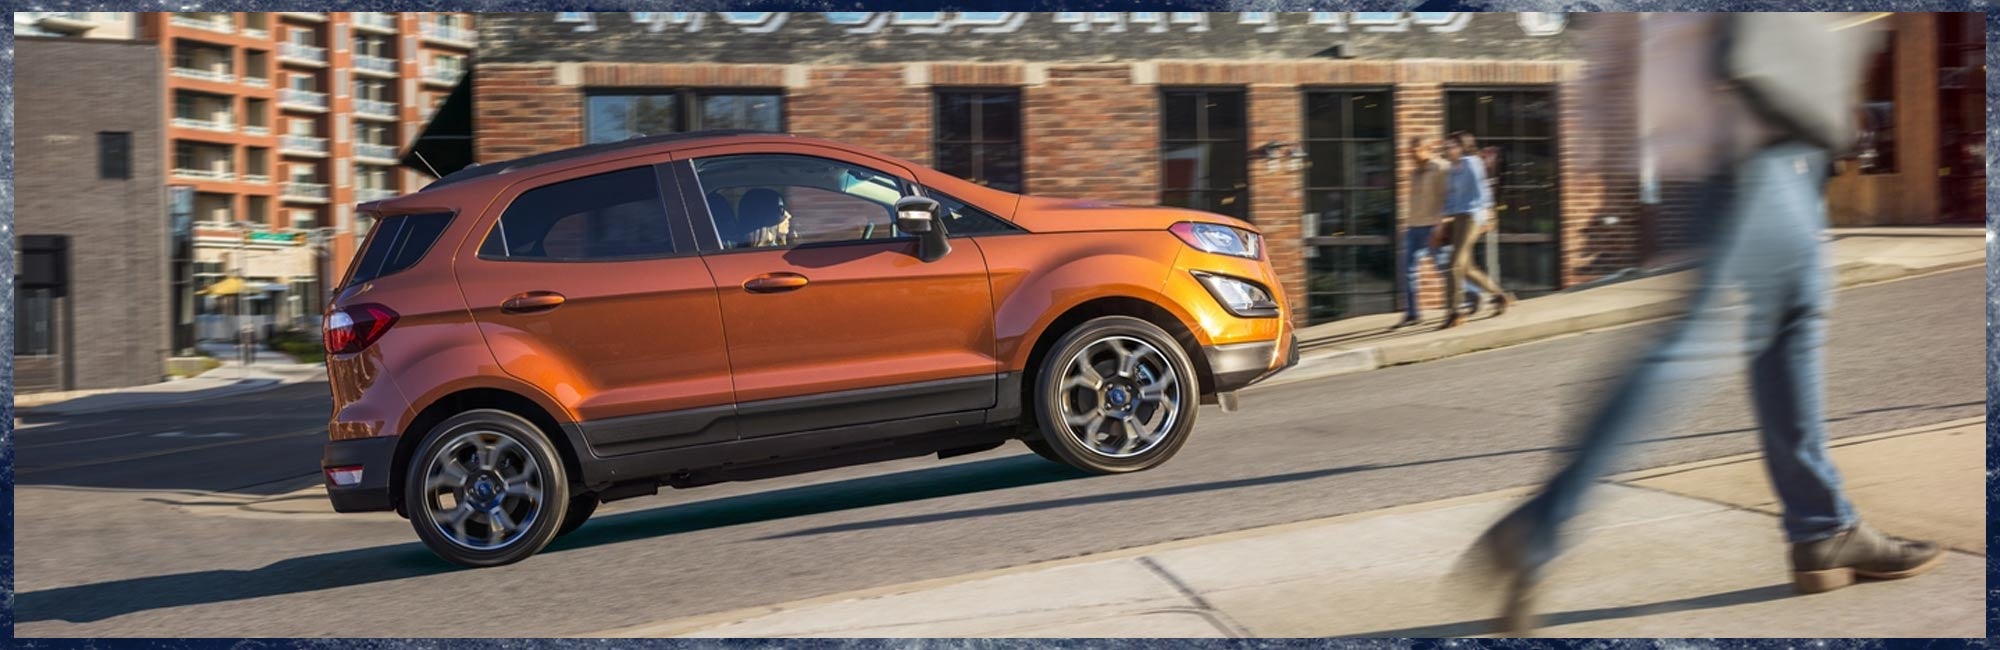 Ford EcoSport Lease Offers in Moon Township, PA